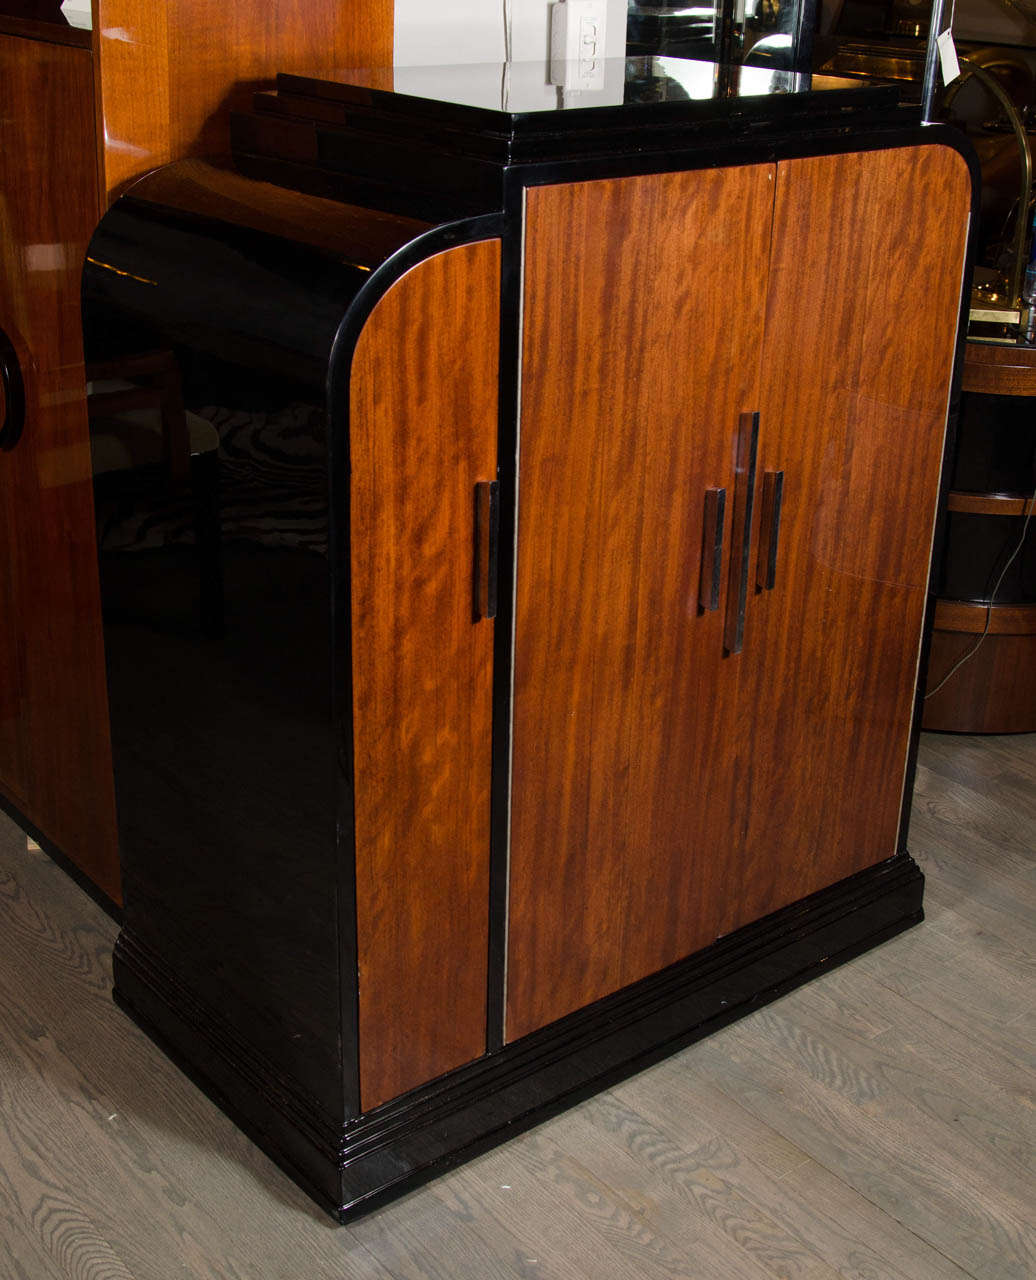 This stunning bar cabinet features exotic mahogany book-matched doors,streamlined Nickel pulls and black lacquer.The two larger doors open to reveal a black lacquer interior fitted with two shelves for great storage of barware and four smaller